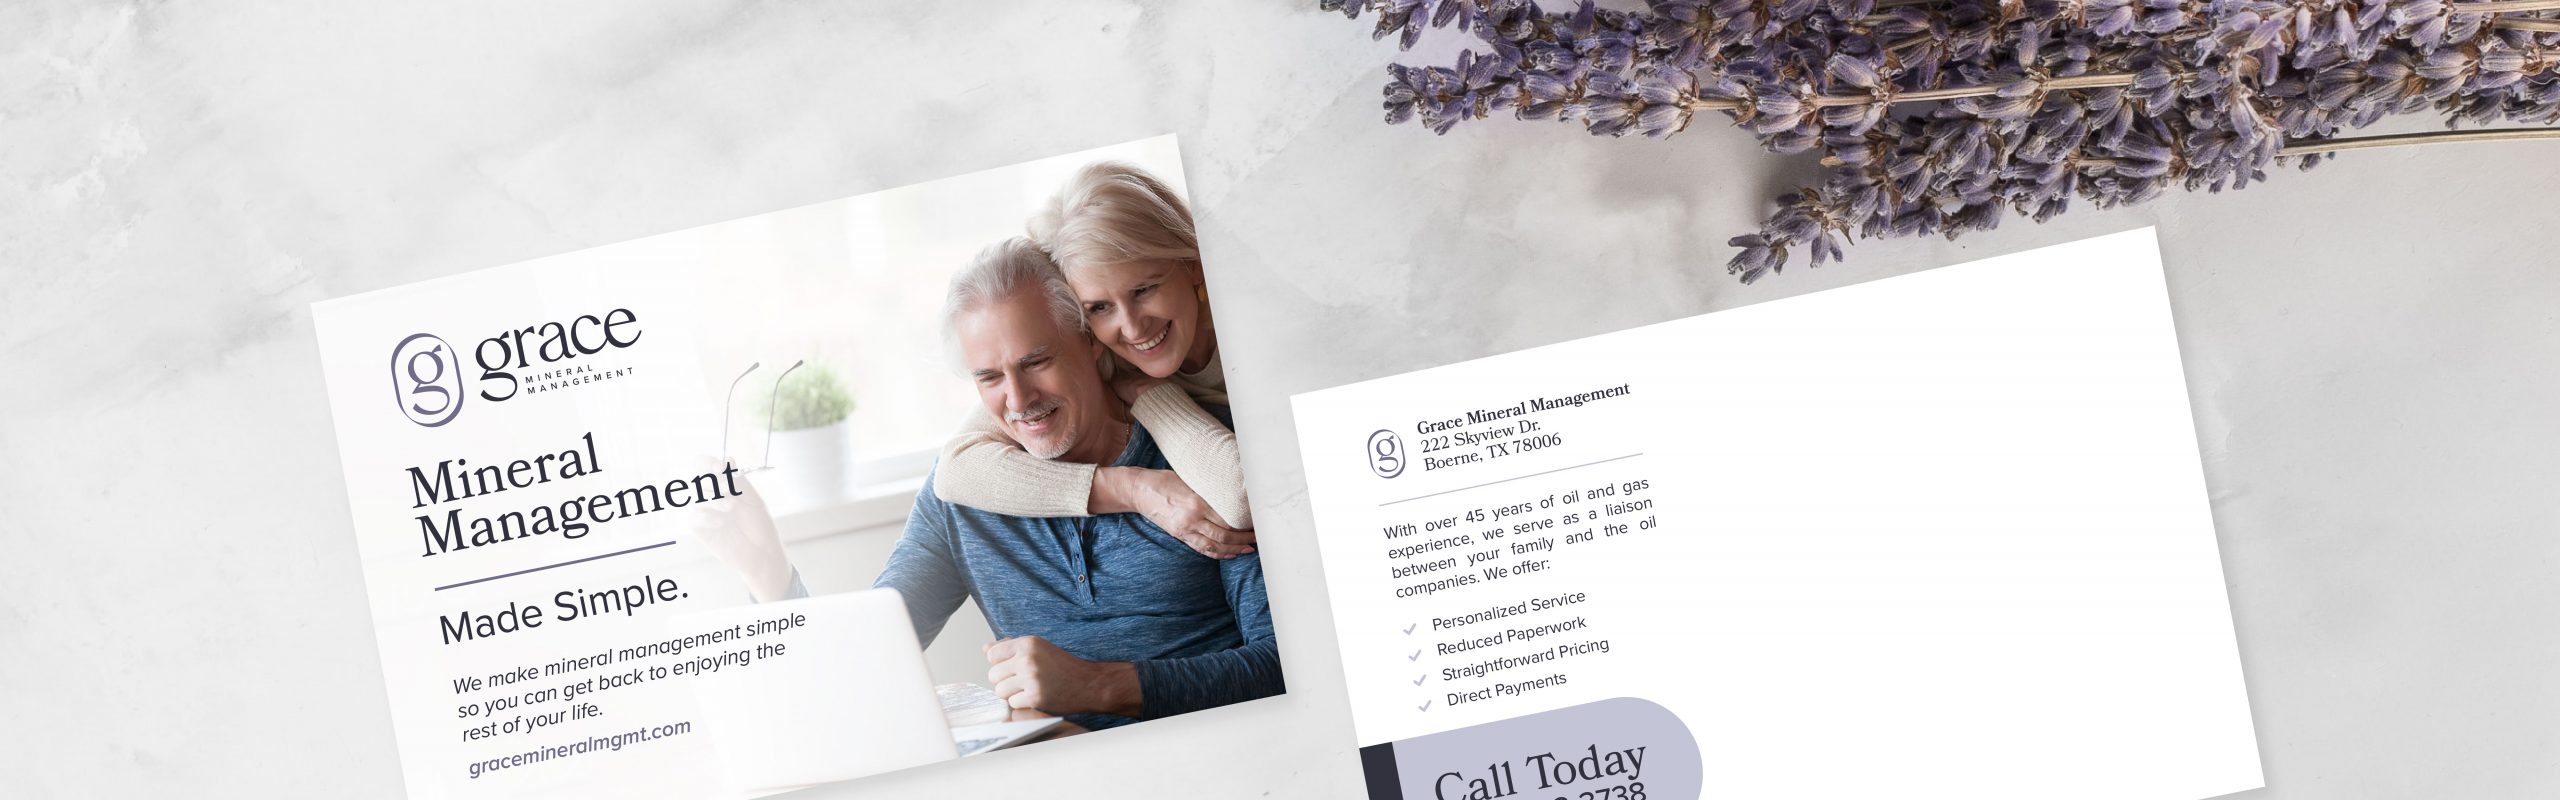 Marketing materials for a company named "Grace Mineral Management," featuring an image of a smiling older couple, with a tagline "made simple." There are also contact details and an invitation to call today.